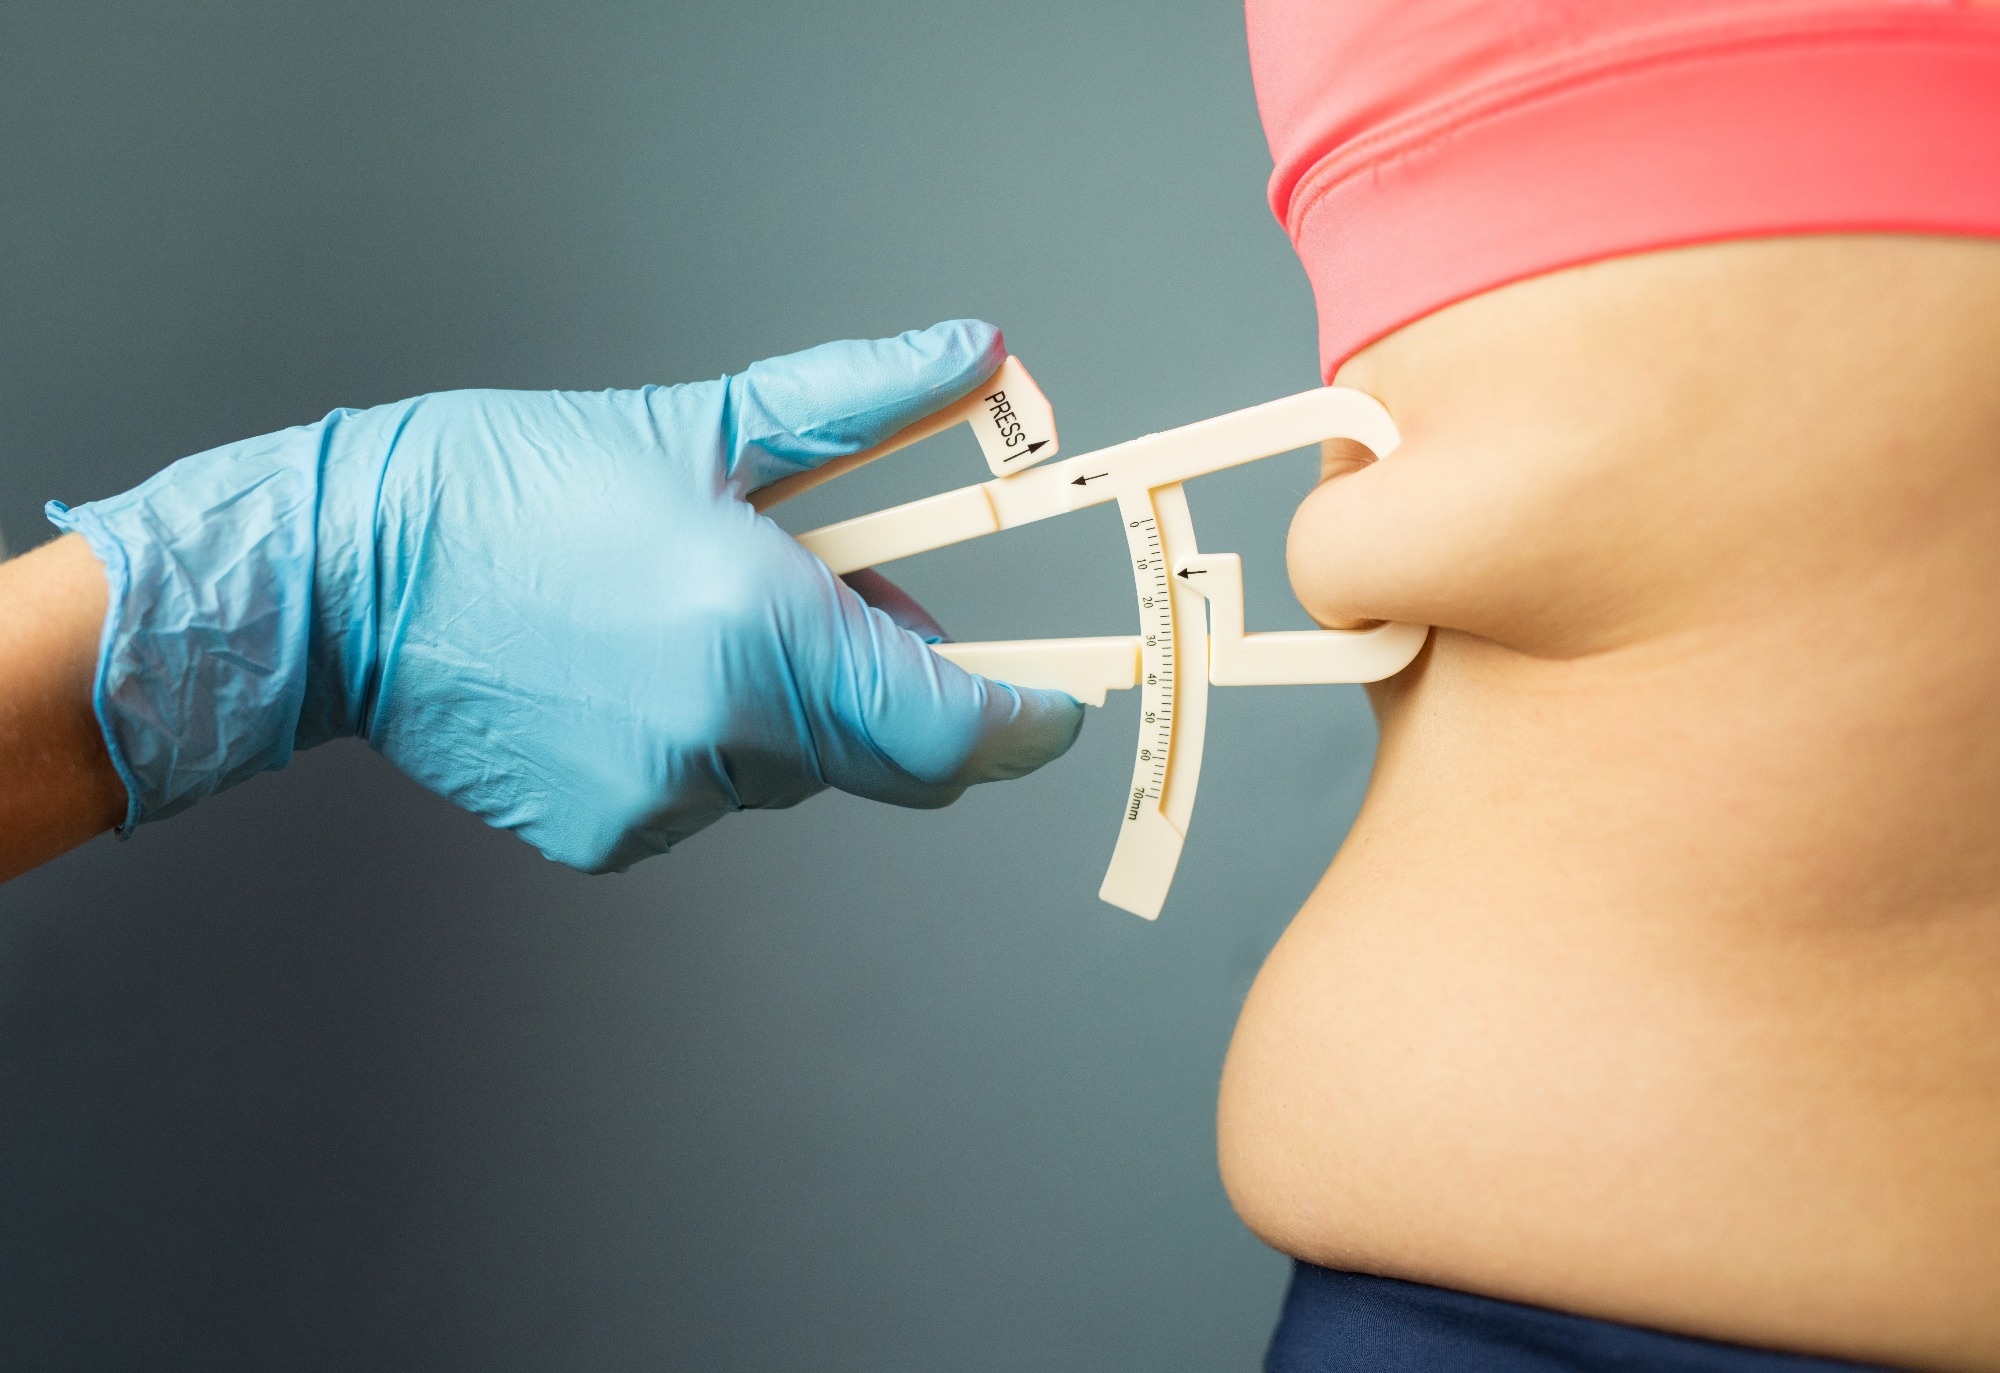 Study: Body Mass Index, Adverse Pregnancy Outcomes, and Cardiovascular Disease Risk. Image Credit: Kaspars Grinvalds / Shutterstock